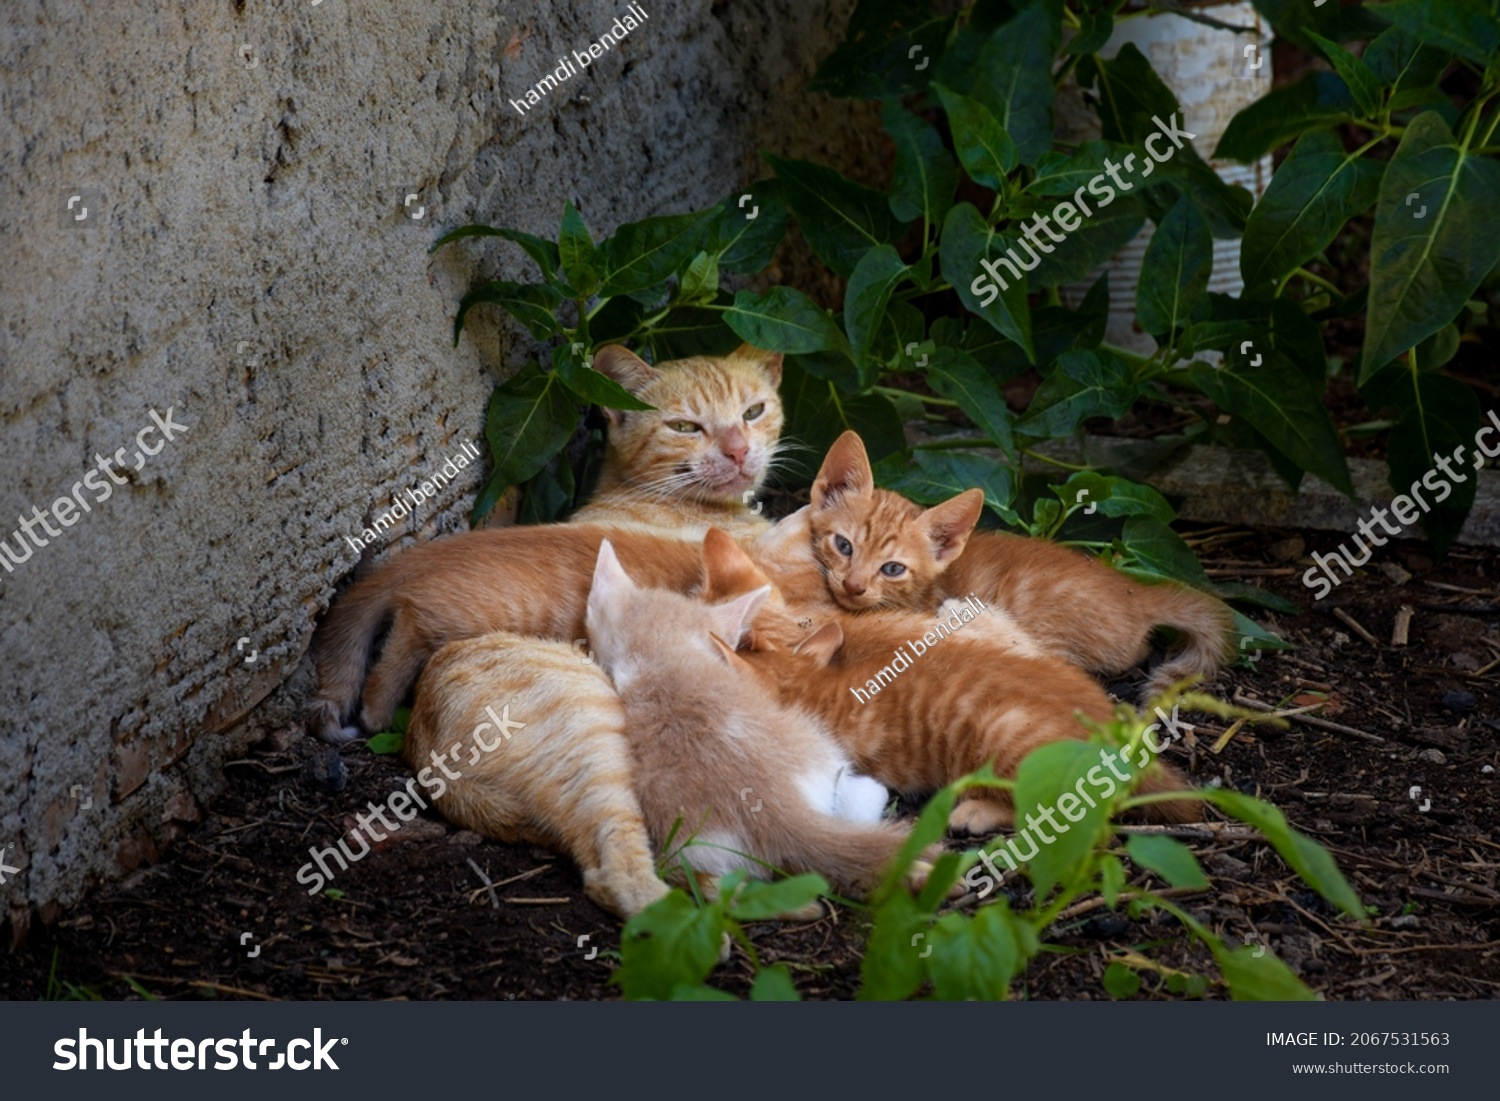 Cat sitting on the garden ground and suckling its young kittens. #2067531563